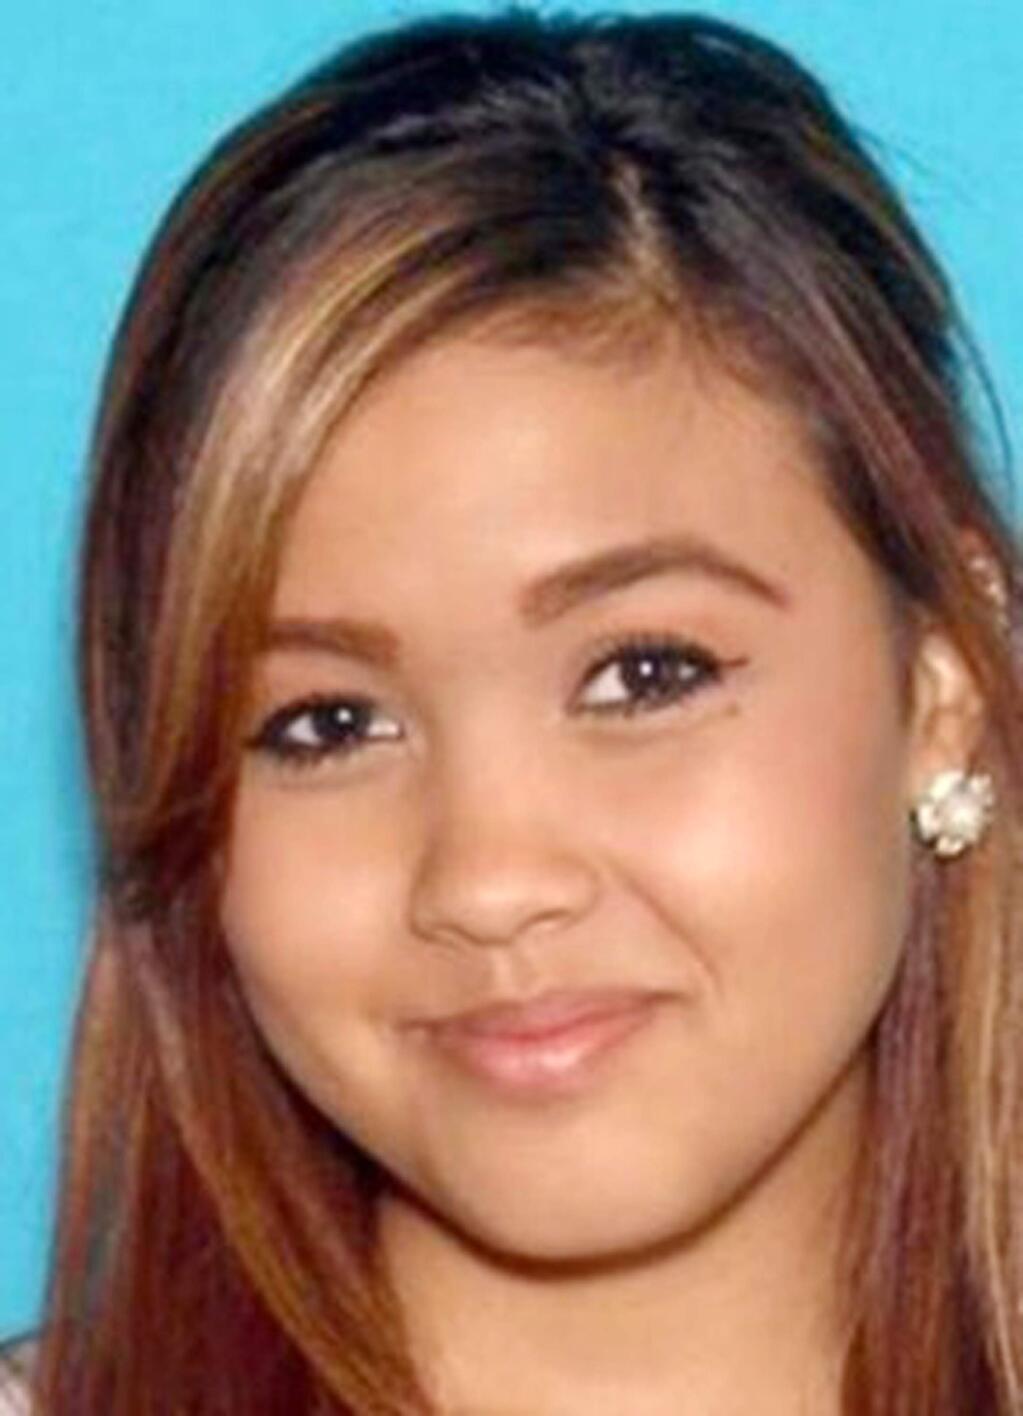 This undated photo provided by the FBI shows Alycia 'Aly' Leane Yeoman. Authorities are offering a $5,000 reward for information about the 20-year-old northern California college student who has been missing since March 30, 2017. Yeoman's family said in a statement Friday, April 7, 2017, that it is unlike her to disappear and skip her two restaurant jobs. They found her pickup truck and cellphone near a river levee about 50 miles north of Sacramento. (Courtesy of FBI via AP)